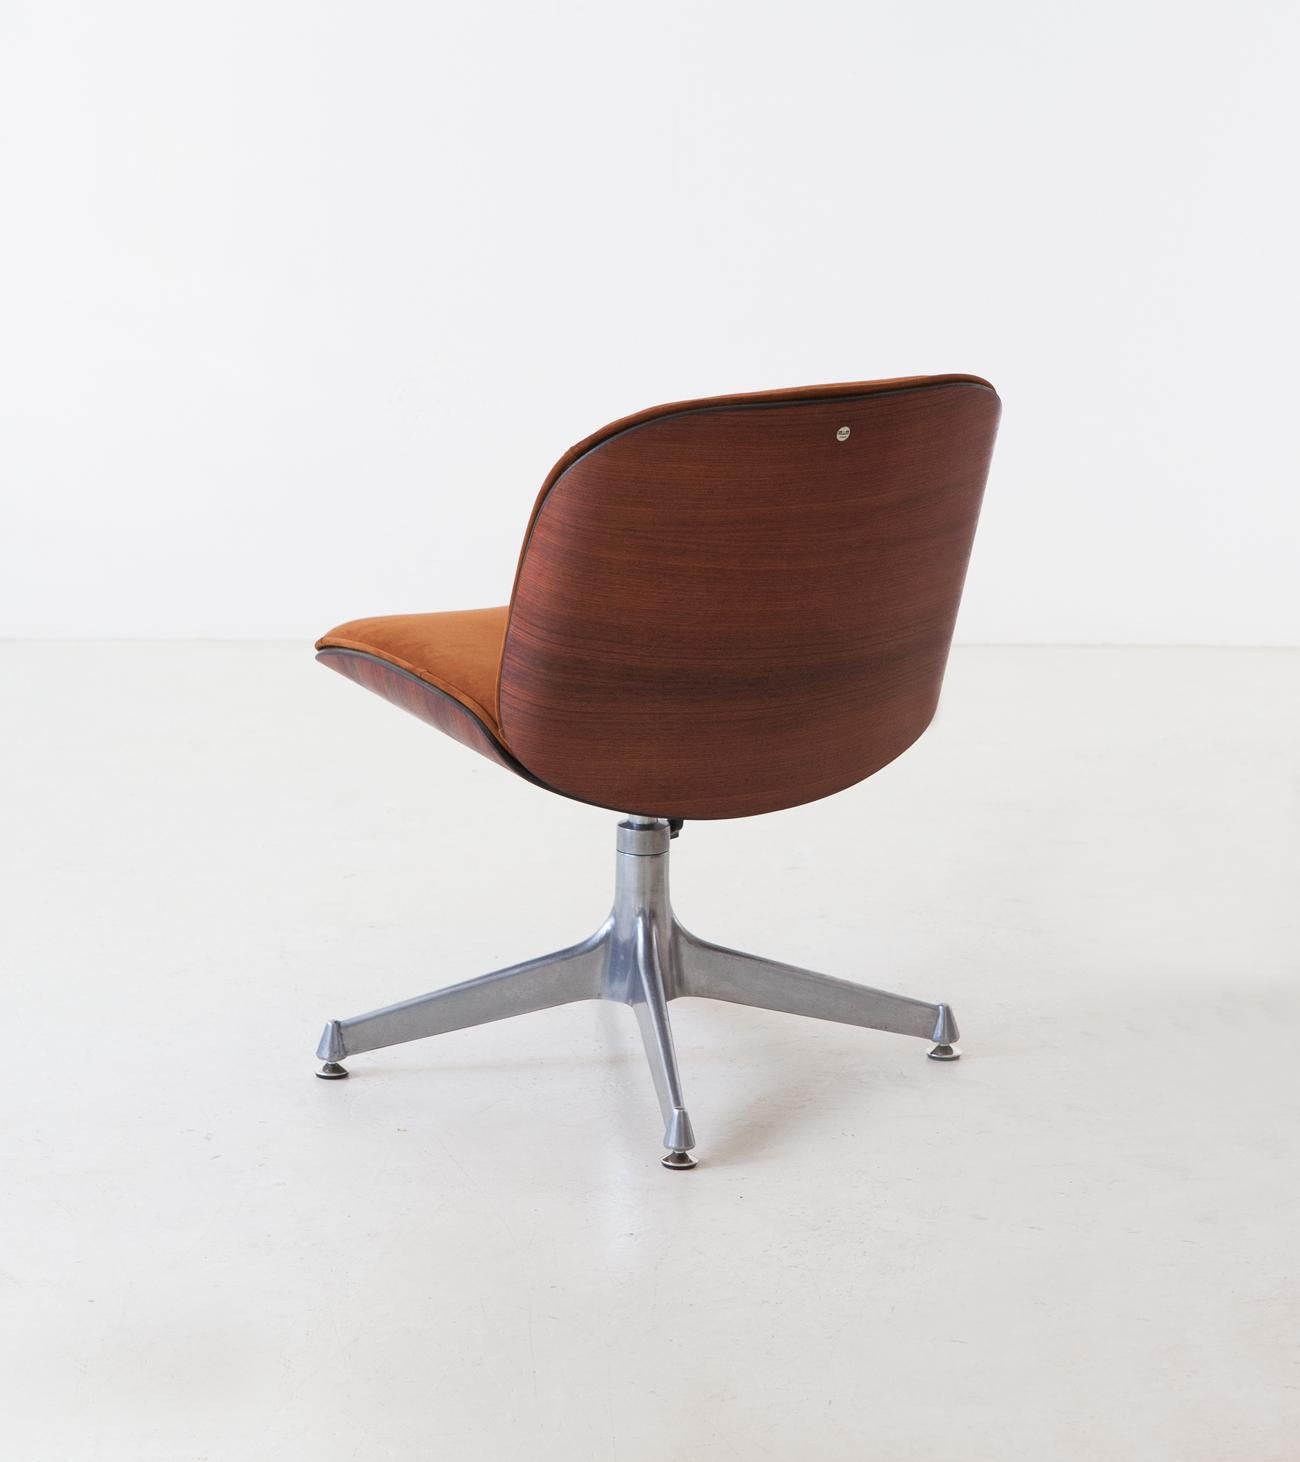 Italian Desk Chair by Ico Parisi for Mim,  Exotic Wood and Suede Leather